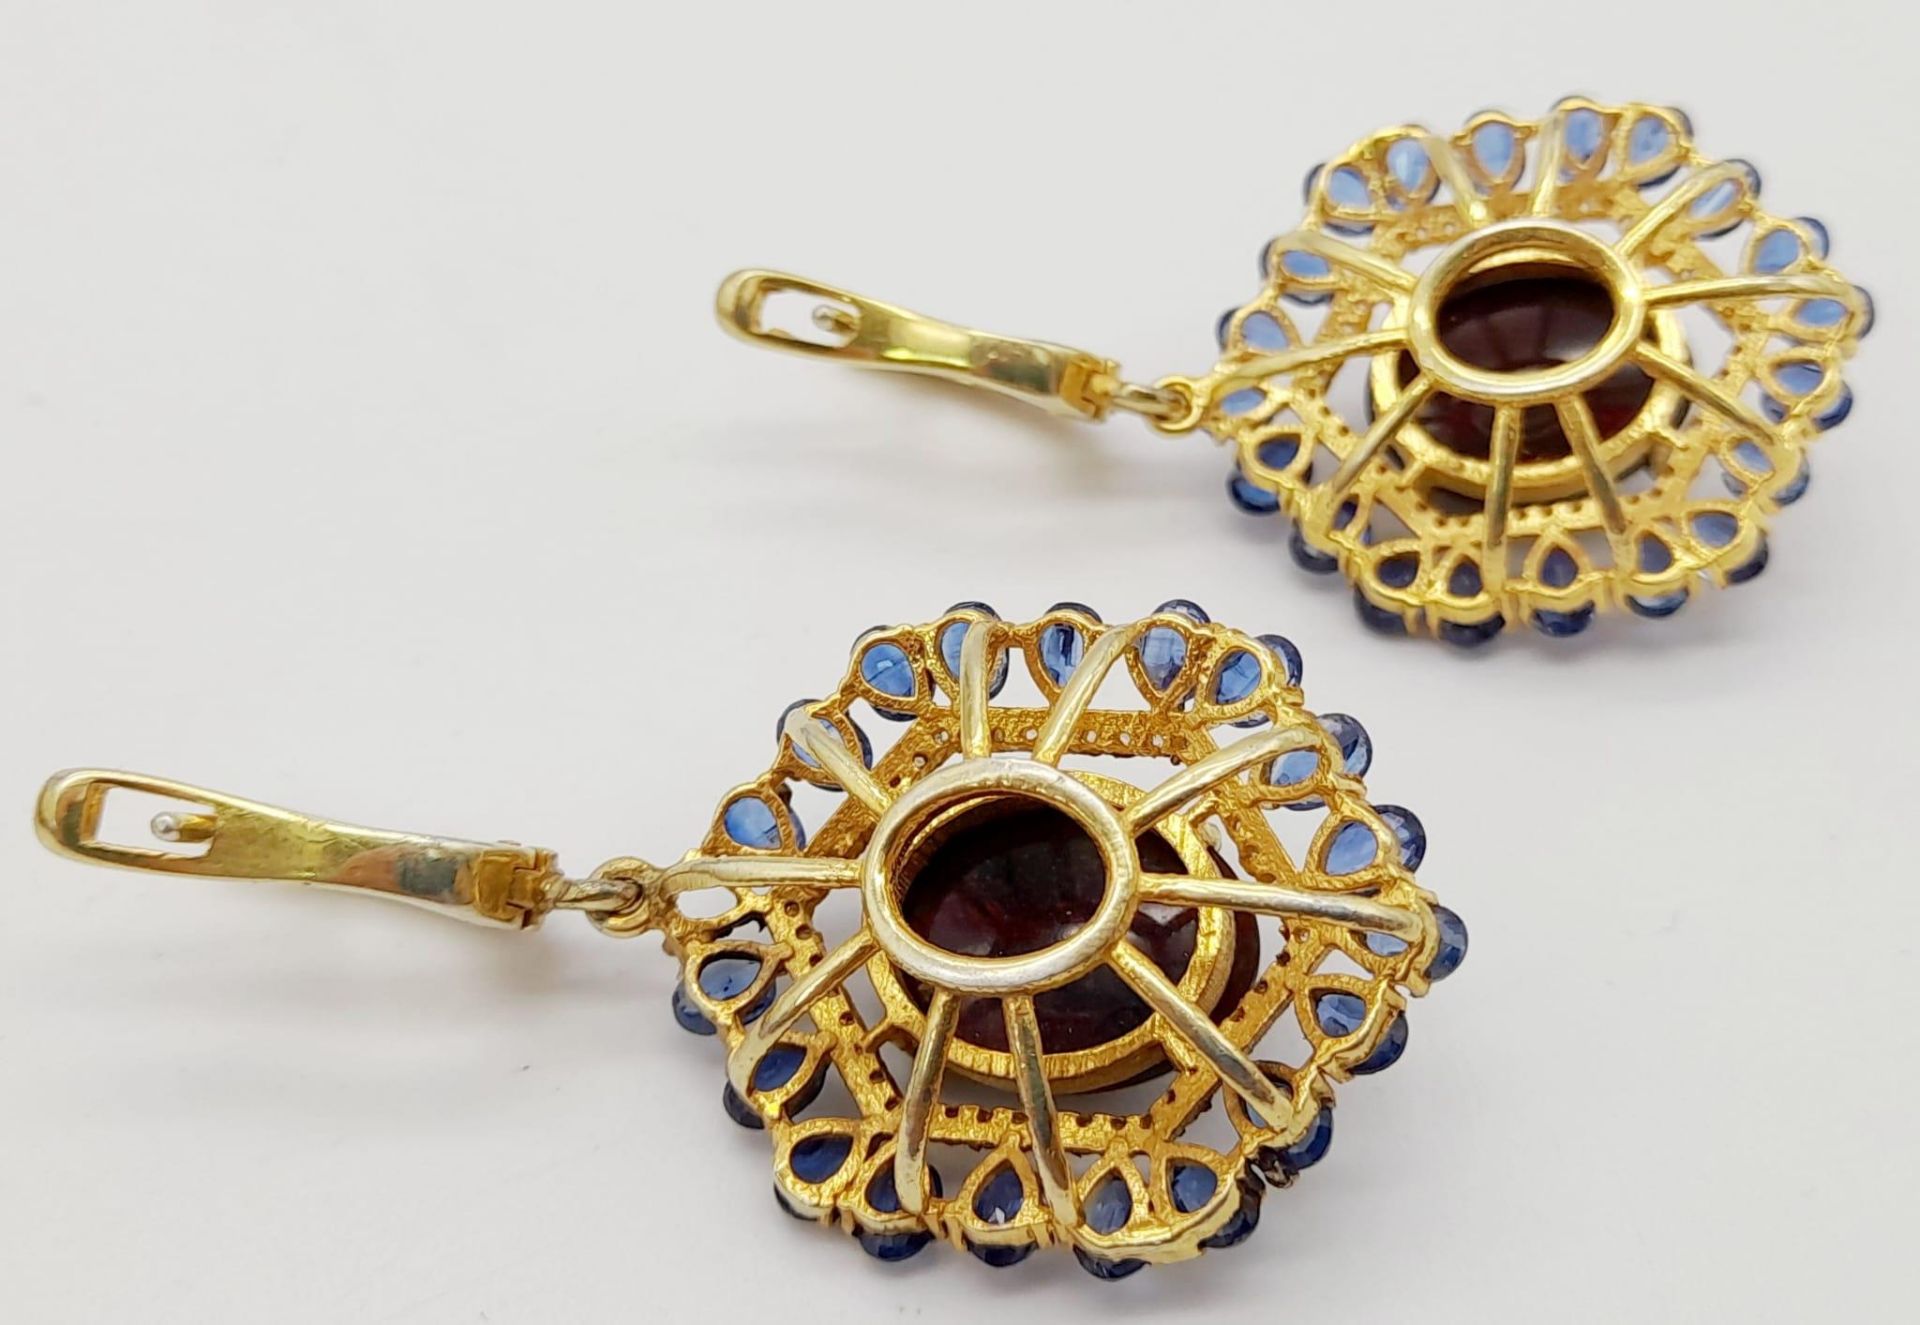 A Pair of Fire Opal and Kyanite Gemstone Hexagonal Drop Earrings. Set in gold plated 925 silver. - Image 6 of 7